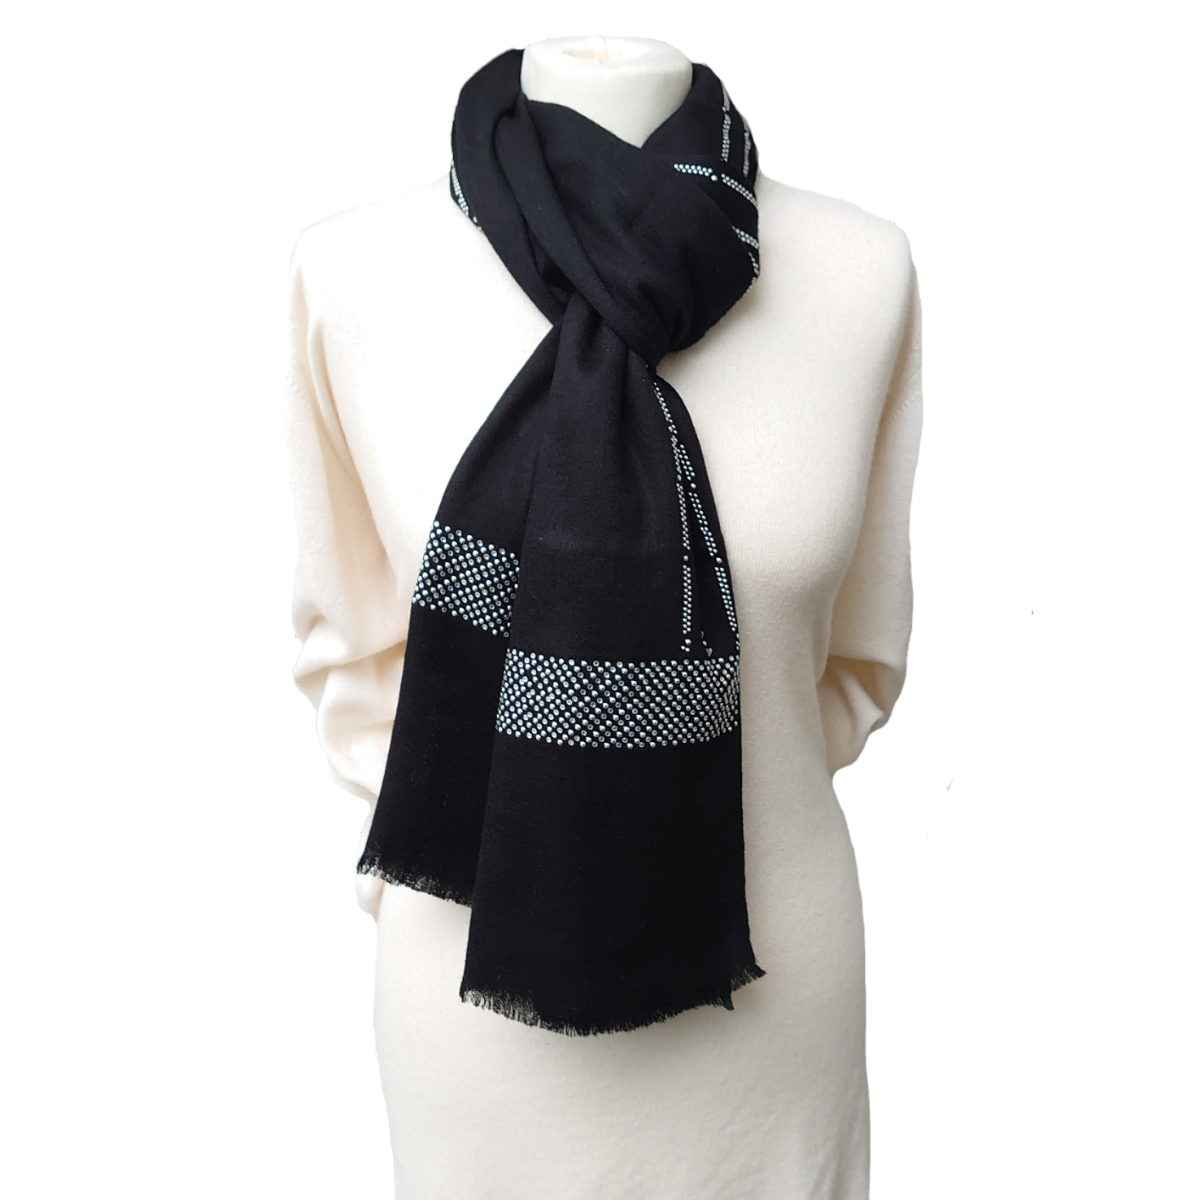 Ltd Edition Fine Pashmina Stole - Large Scarf With Hand-Applied Crystals - Black